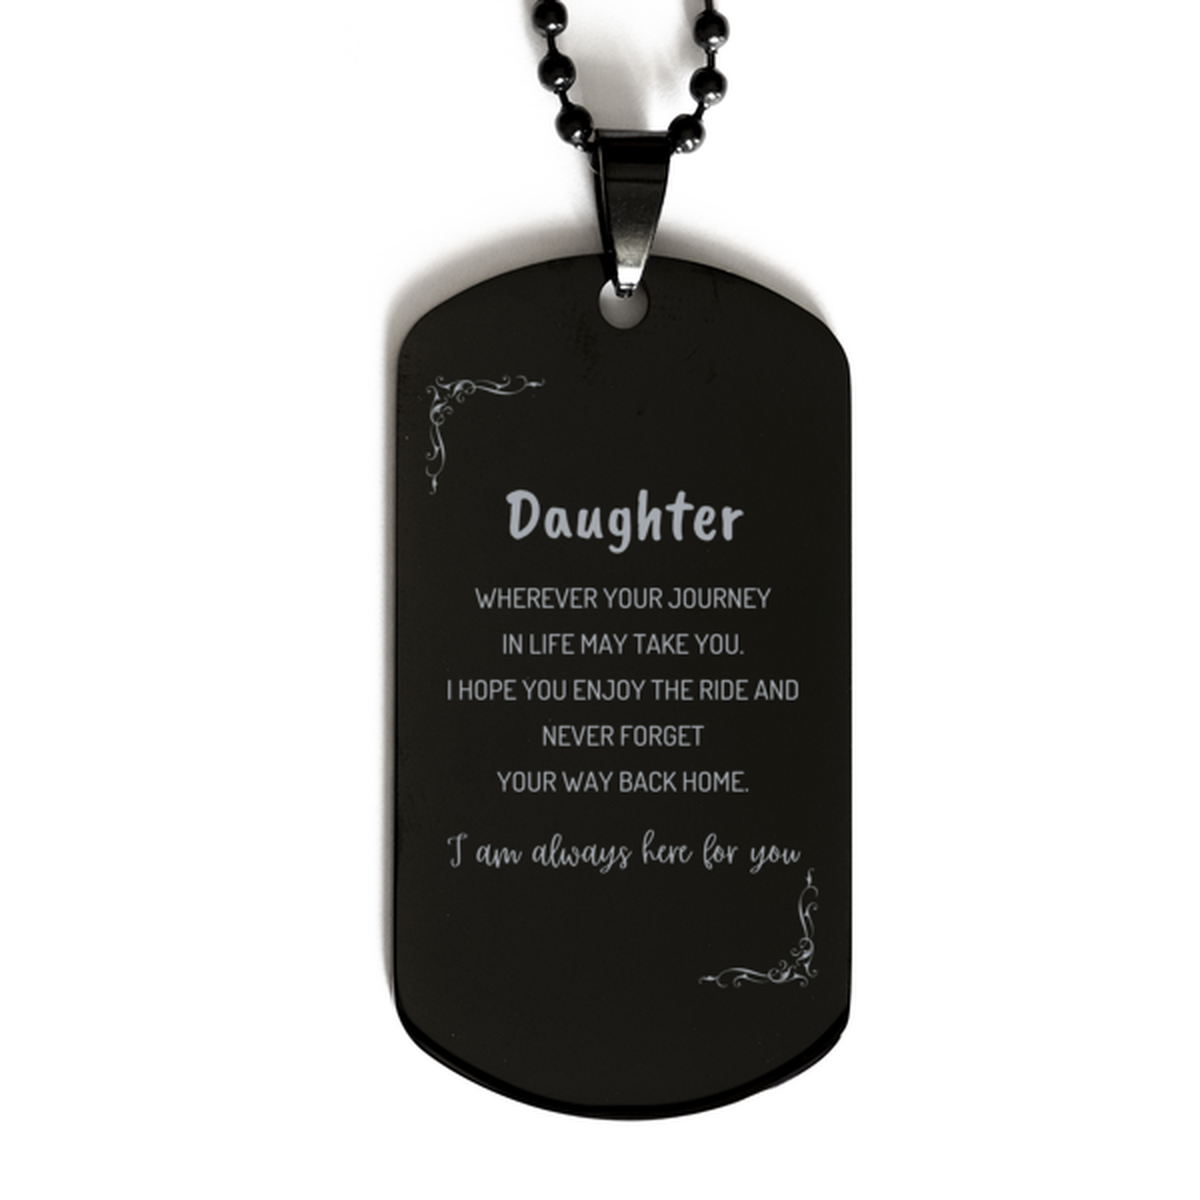 Daughter wherever your journey in life may take you, I am always here for you Daughter Black Dog Tag, Awesome Christmas Gifts For Daughter, Daughter Birthday Gifts for Men Women Family Loved One